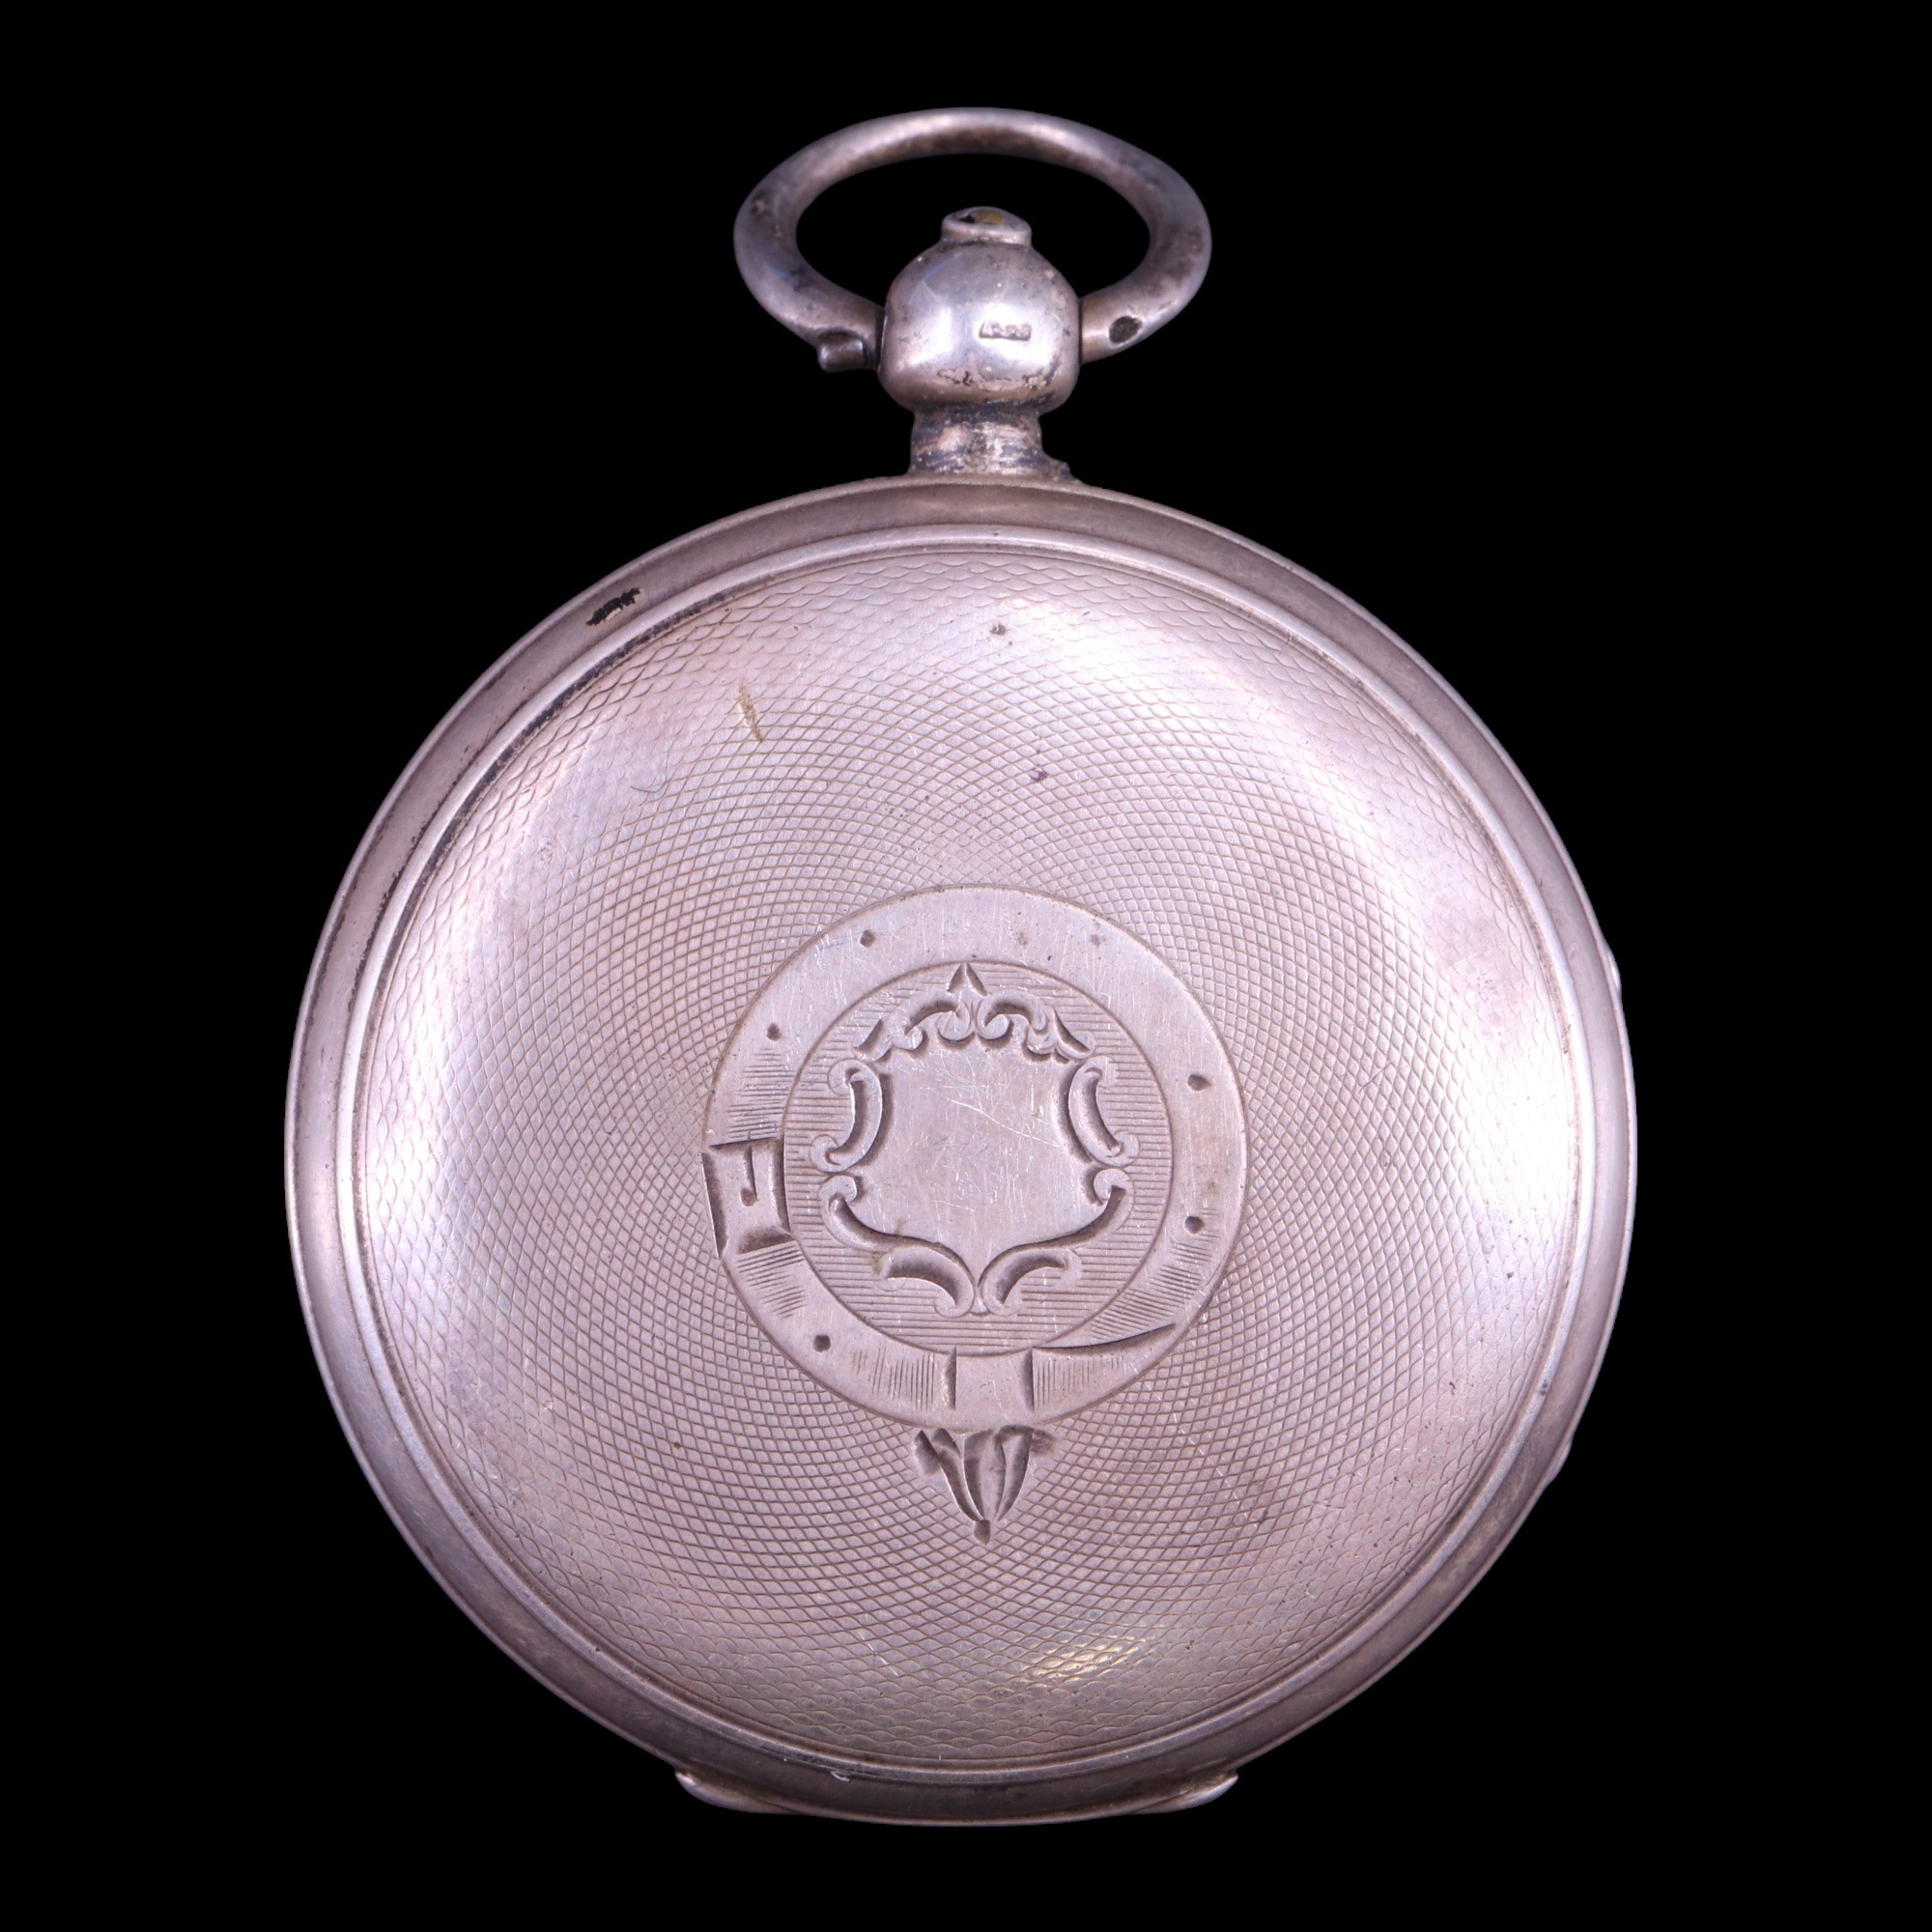 An early 20th Century 'The "Express" English Lever' silver pocket watch by J G Graves of - Image 2 of 8